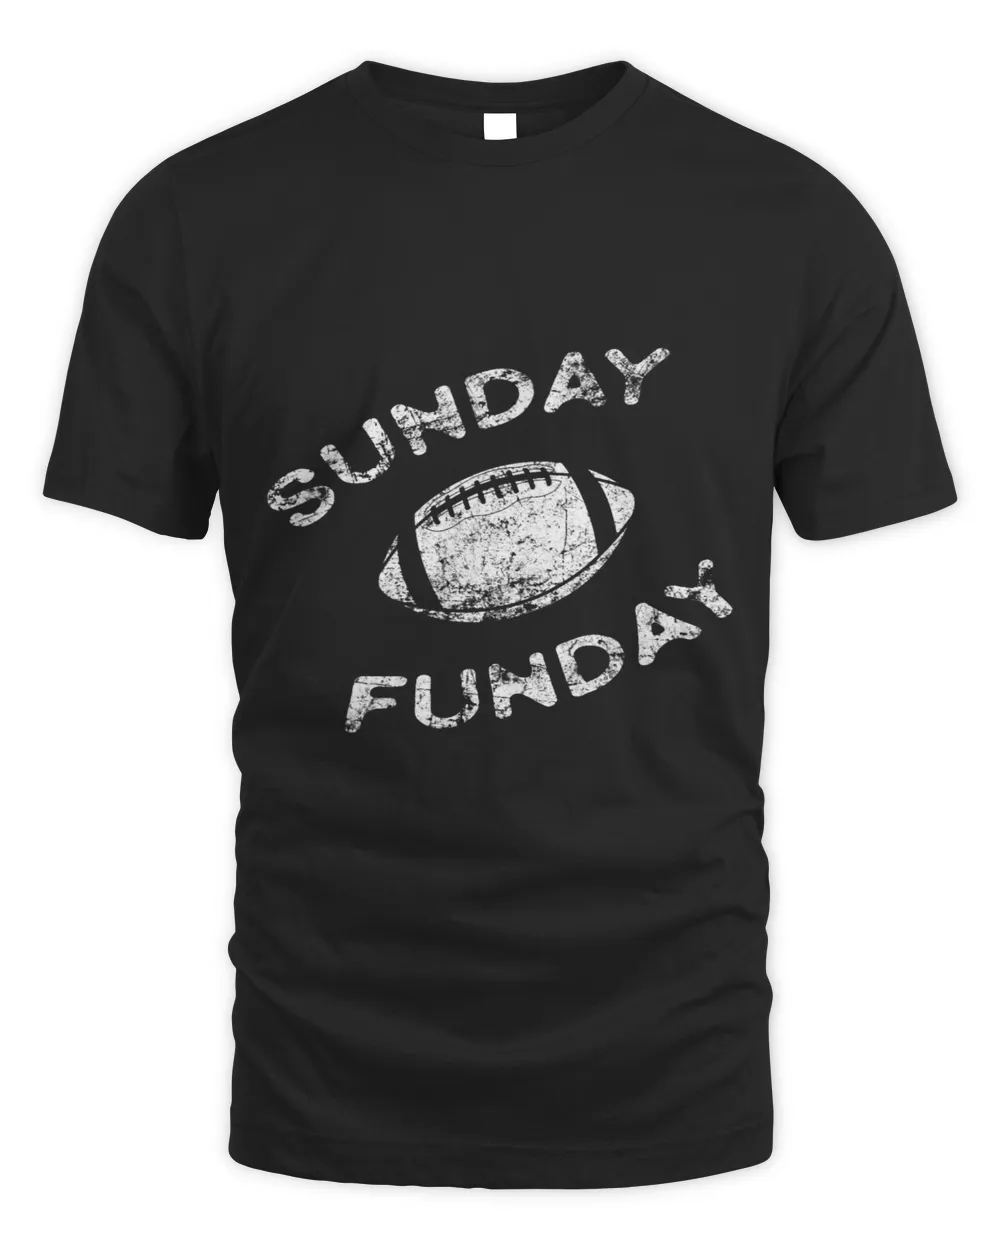 Sunday is Funday Football Fans Party Regular Season Playoffs